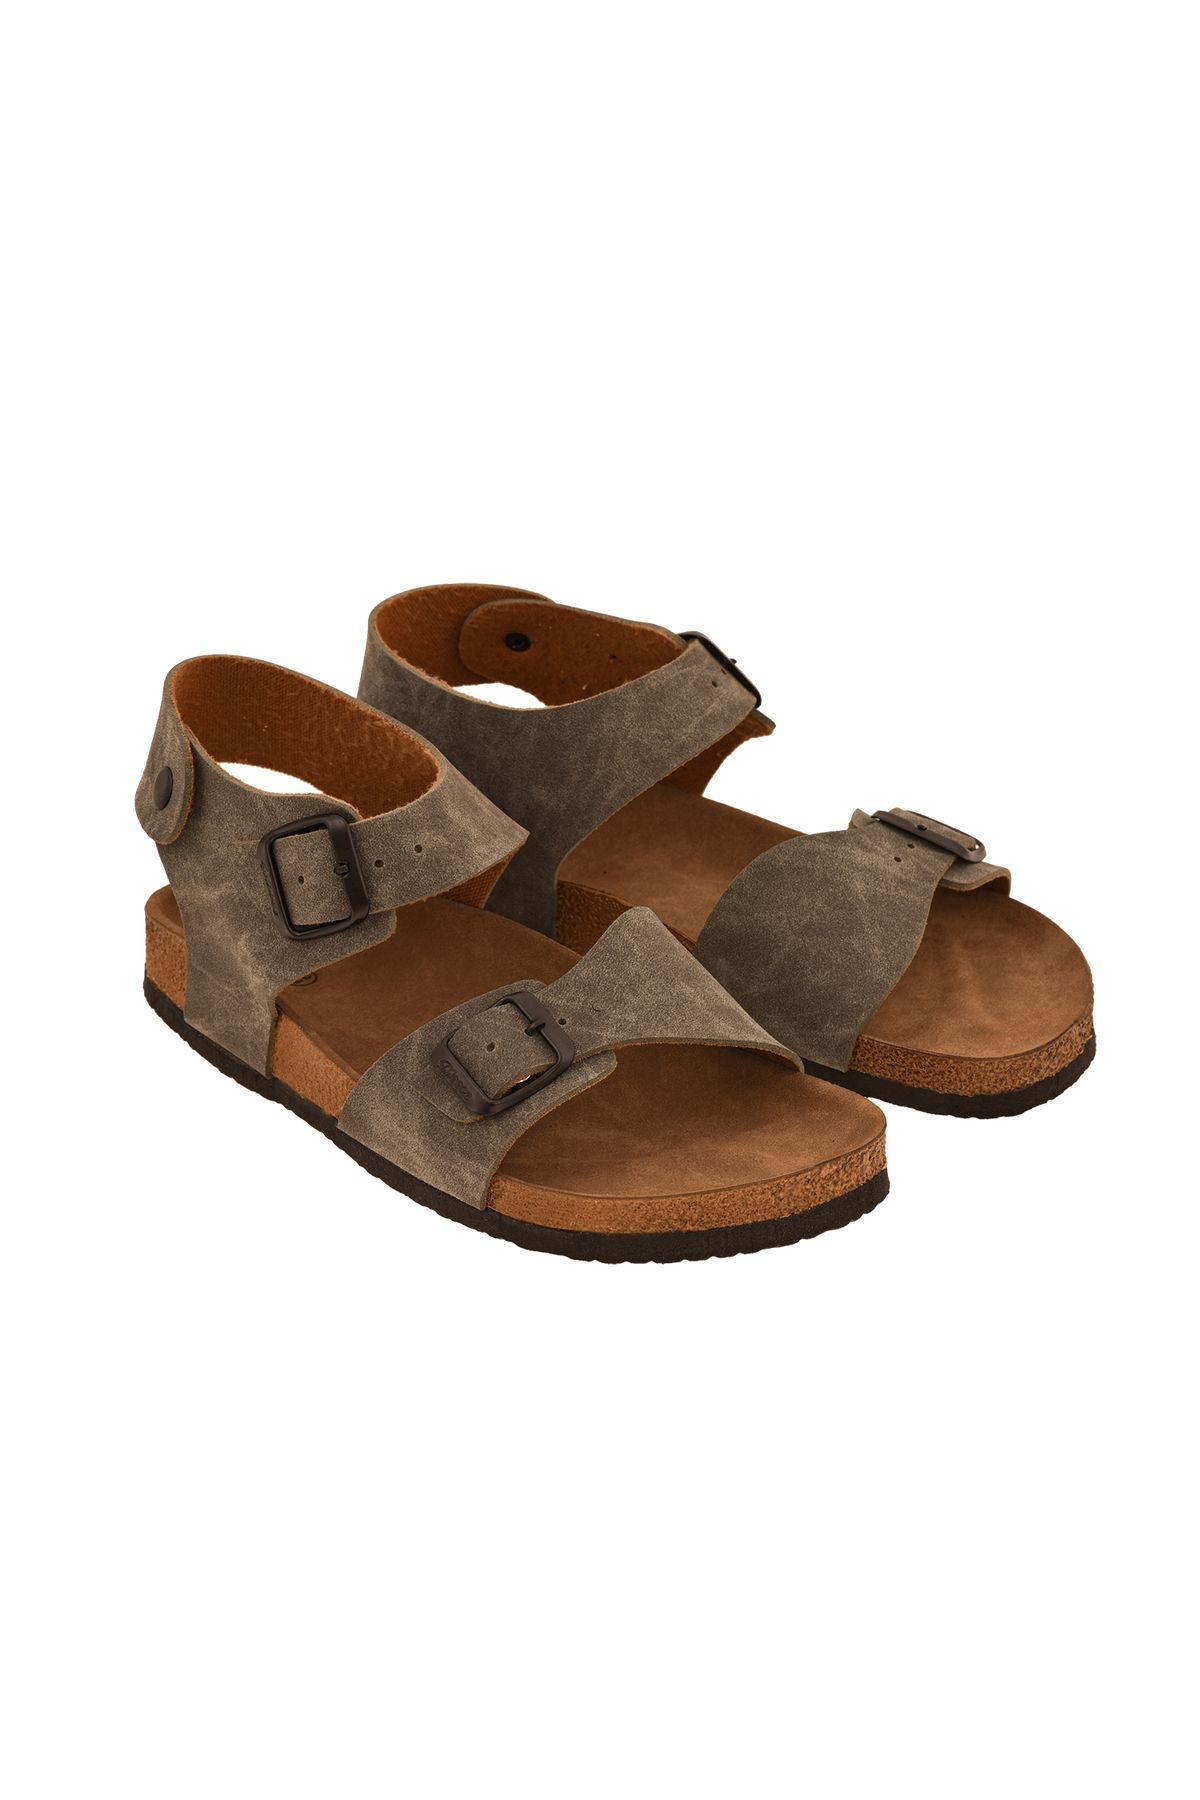 JustBow Unisex Sandalet